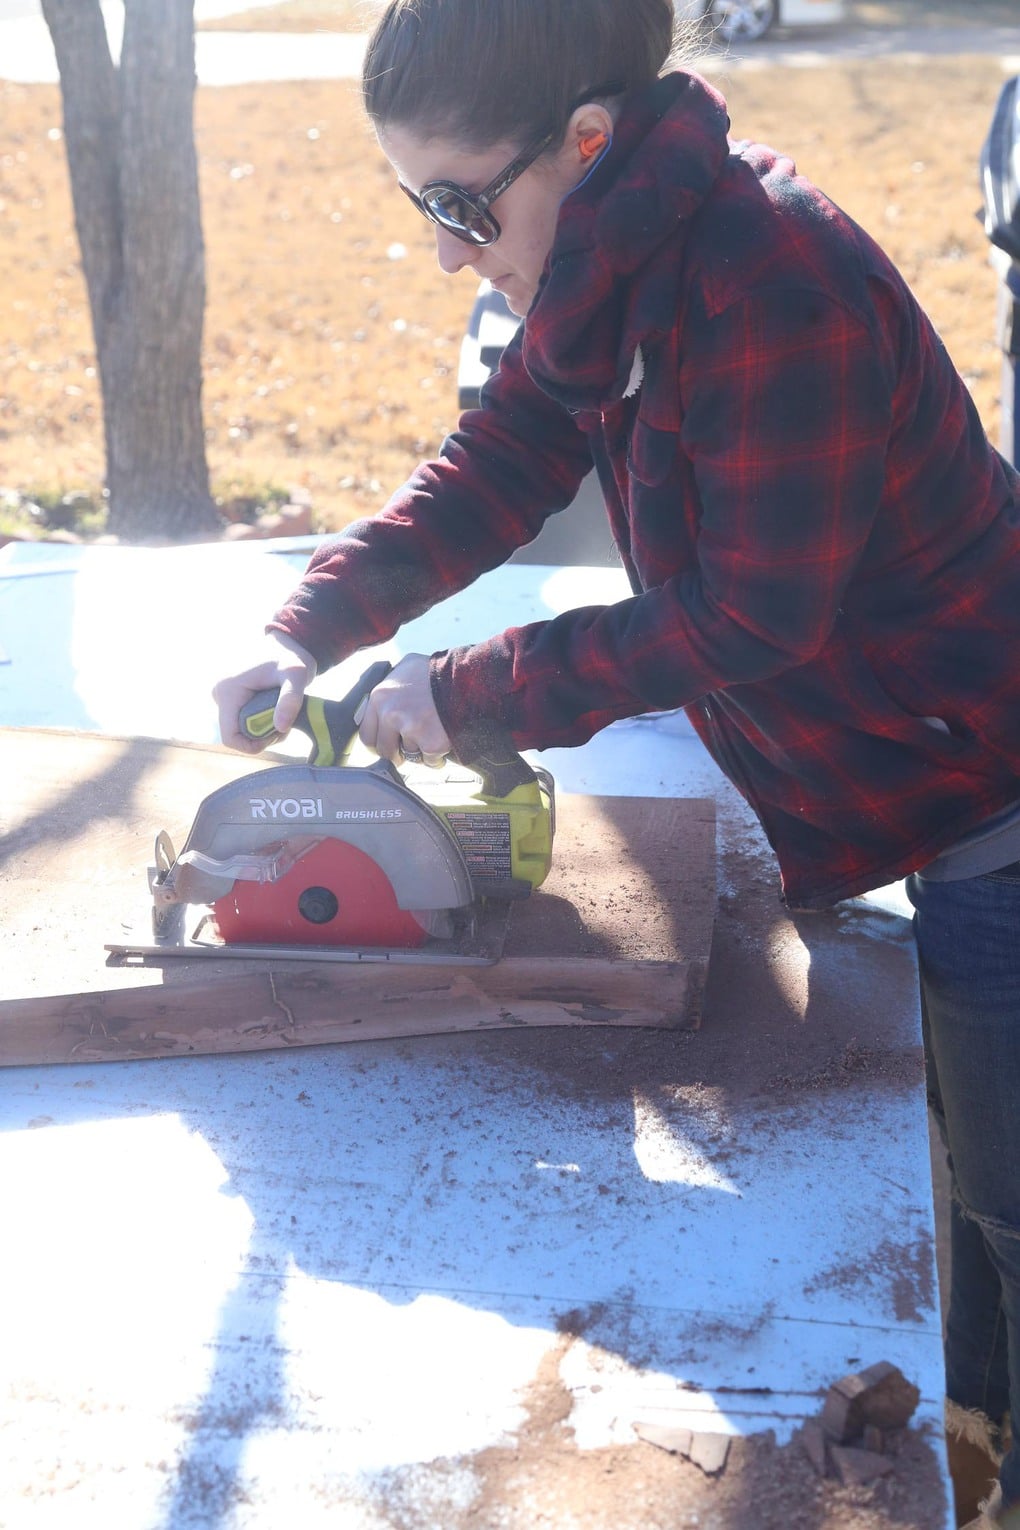 Using circular saw to cut table down for DIY entry table